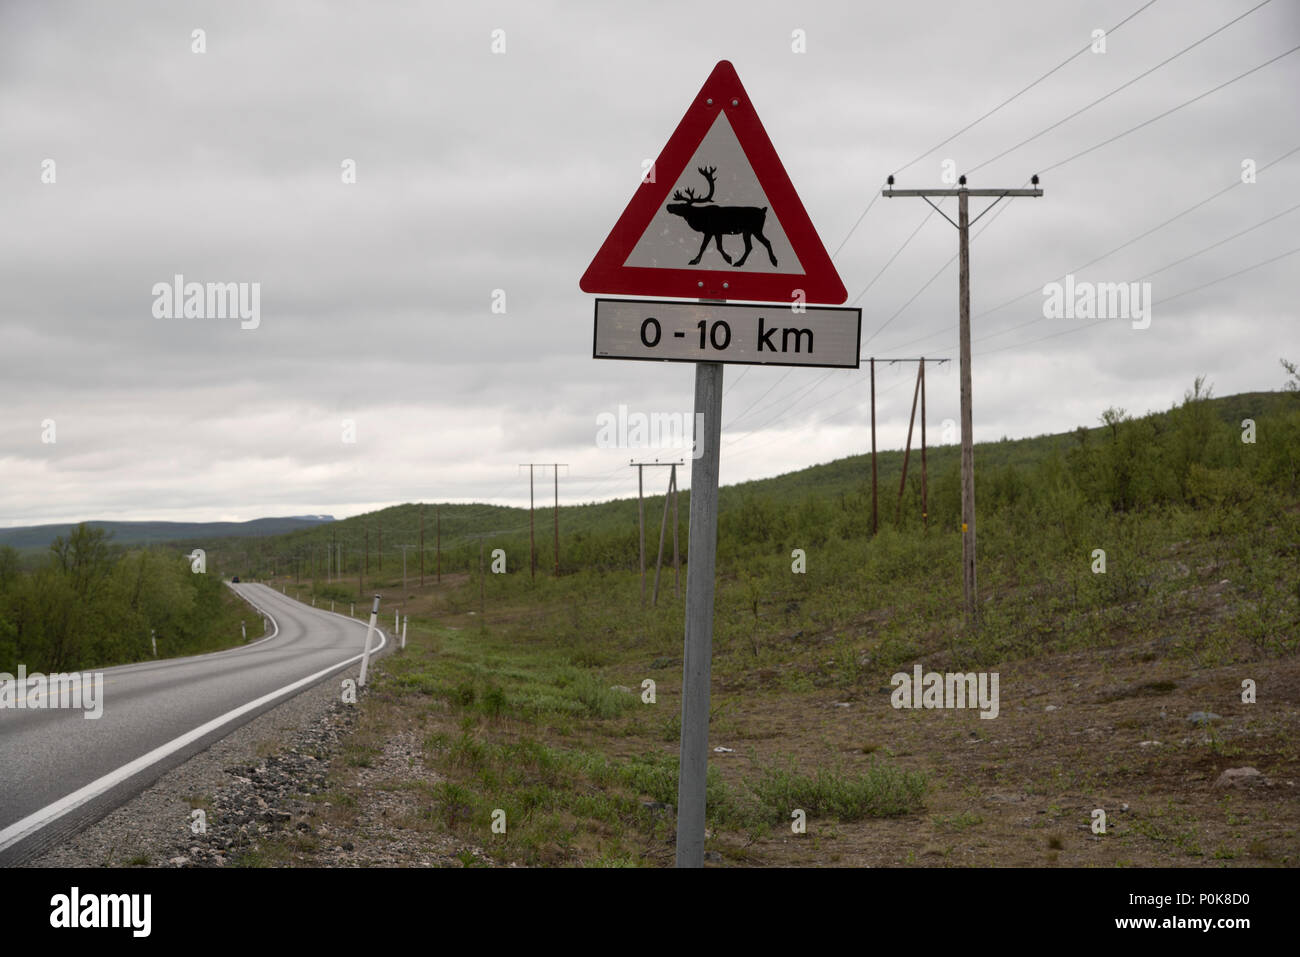 Reindeer are sometimes involved in traffic accidents in Finnmark province of Norway. Therefore specific traffic signs warn about collision risk. Stock Photo